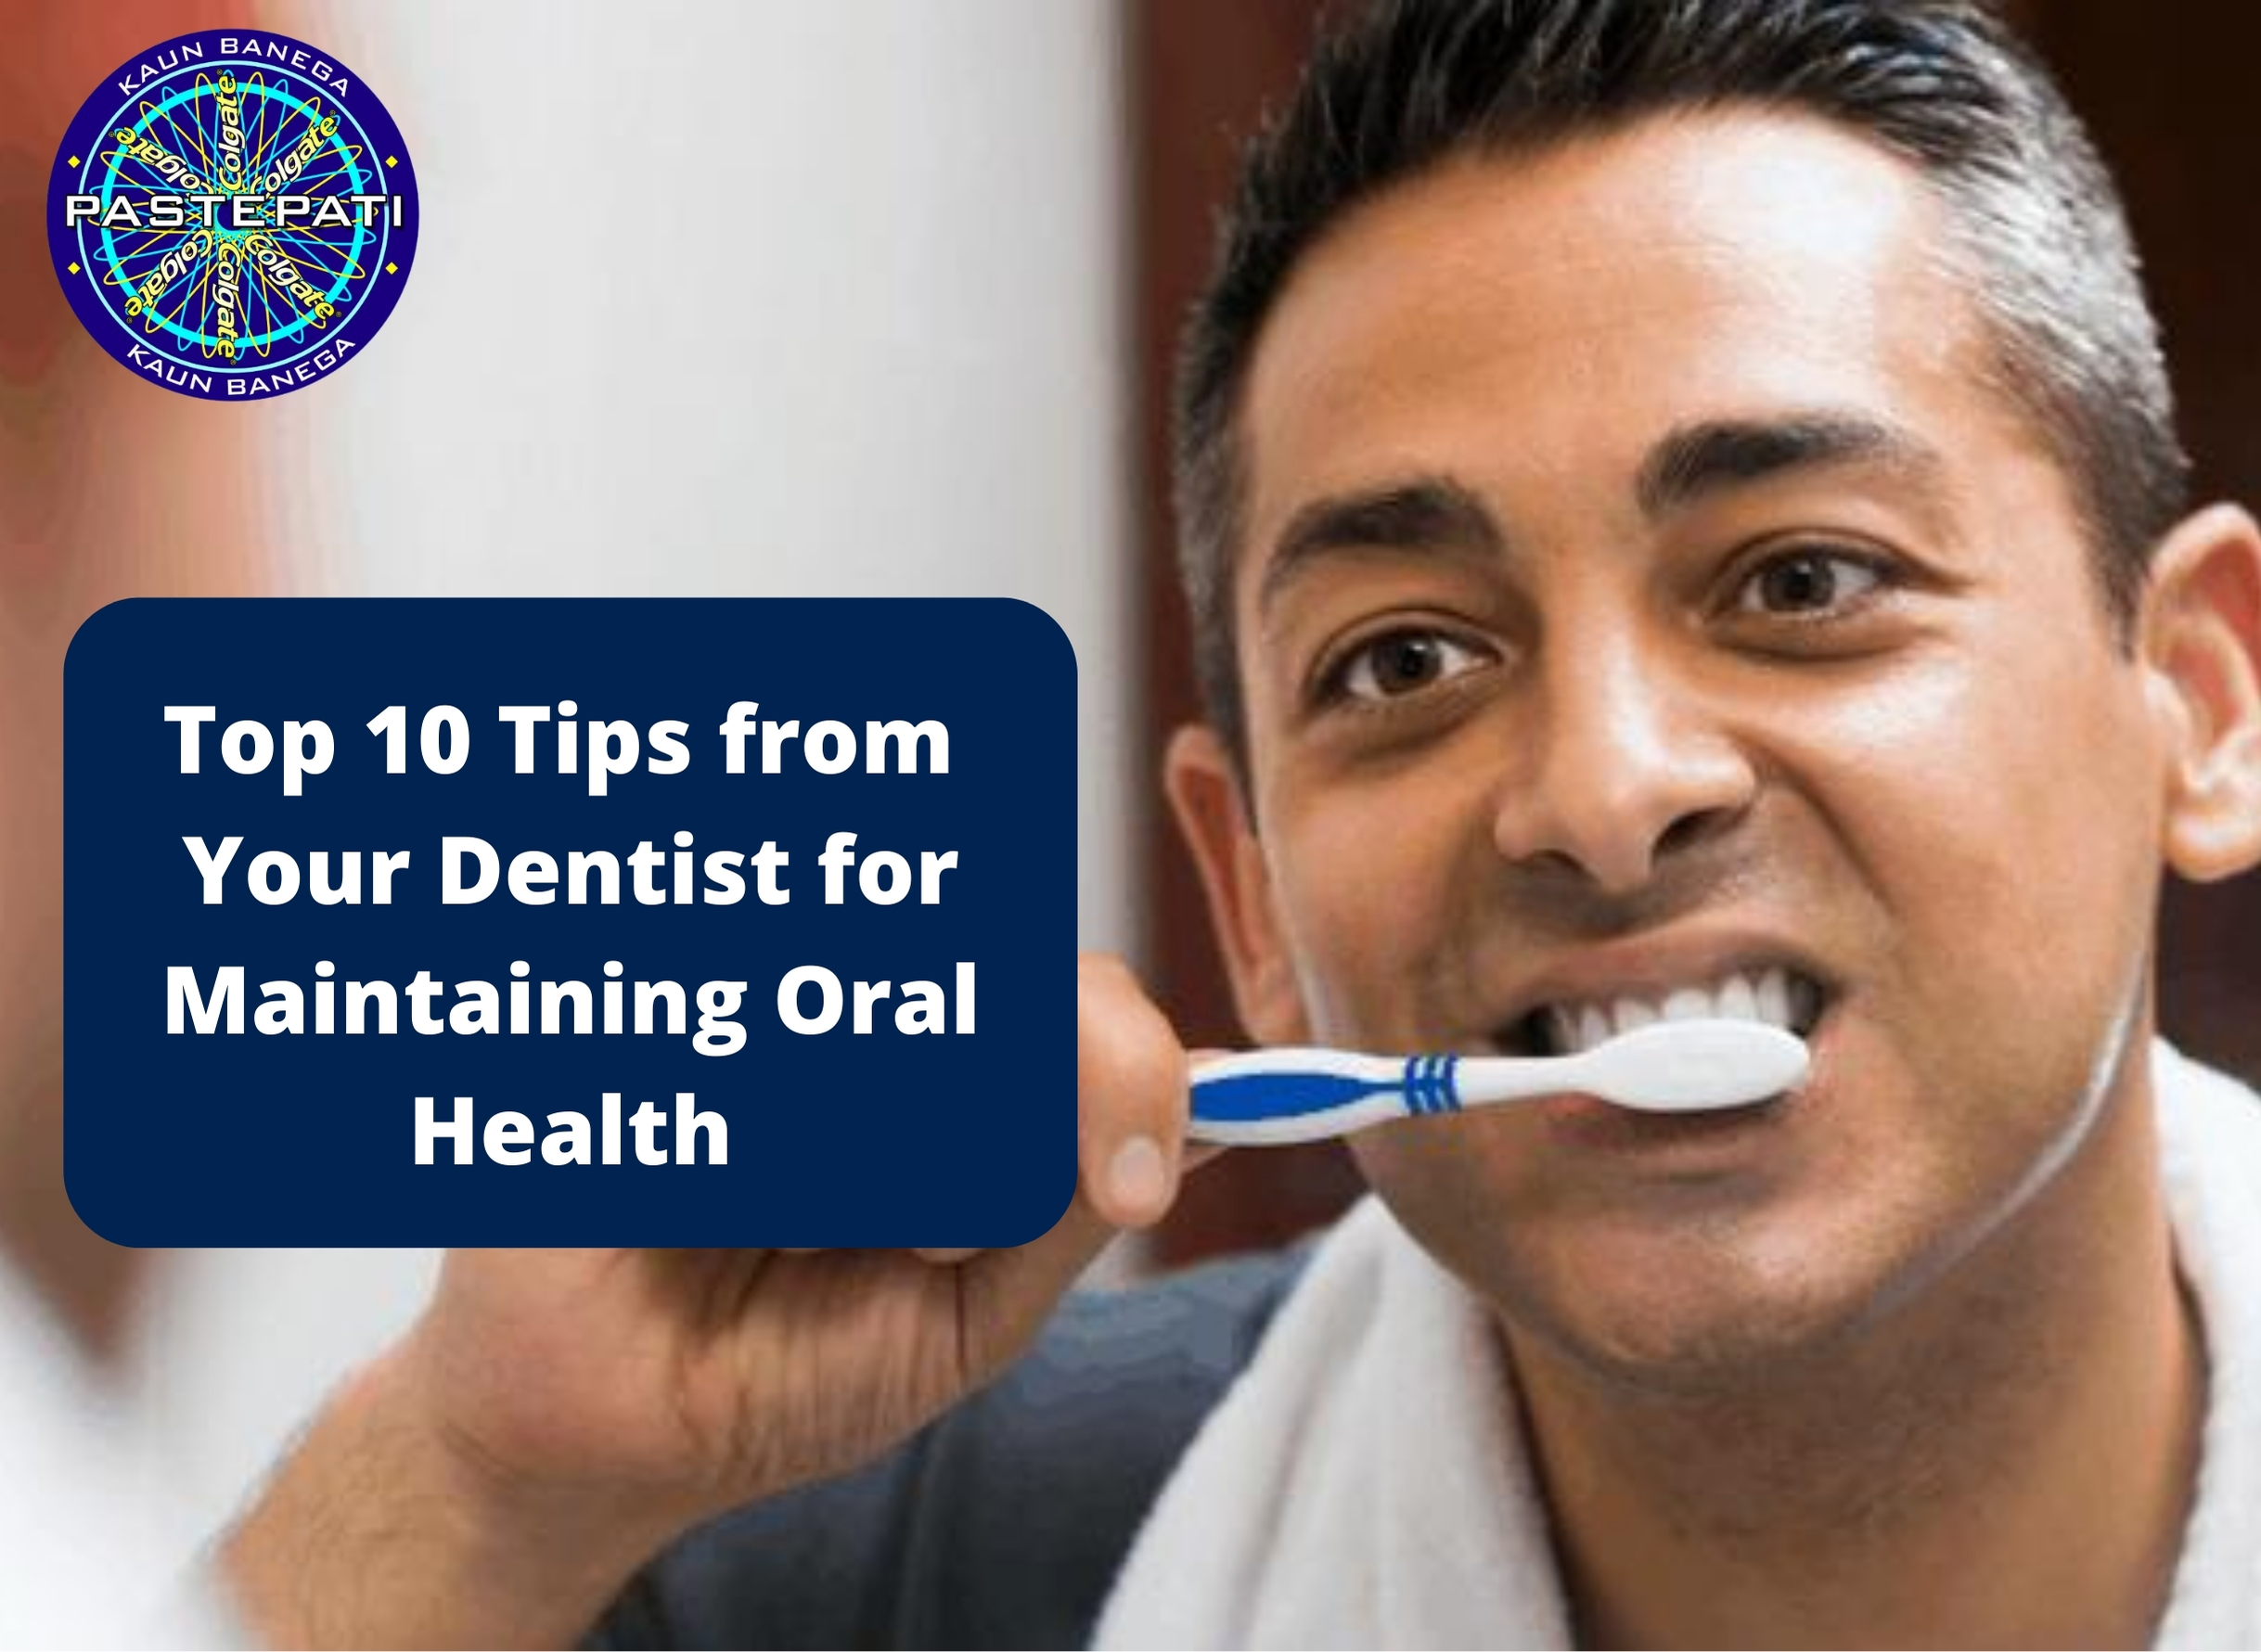 Top 10 Tips from Your Dentist for Maintaining Oral Health